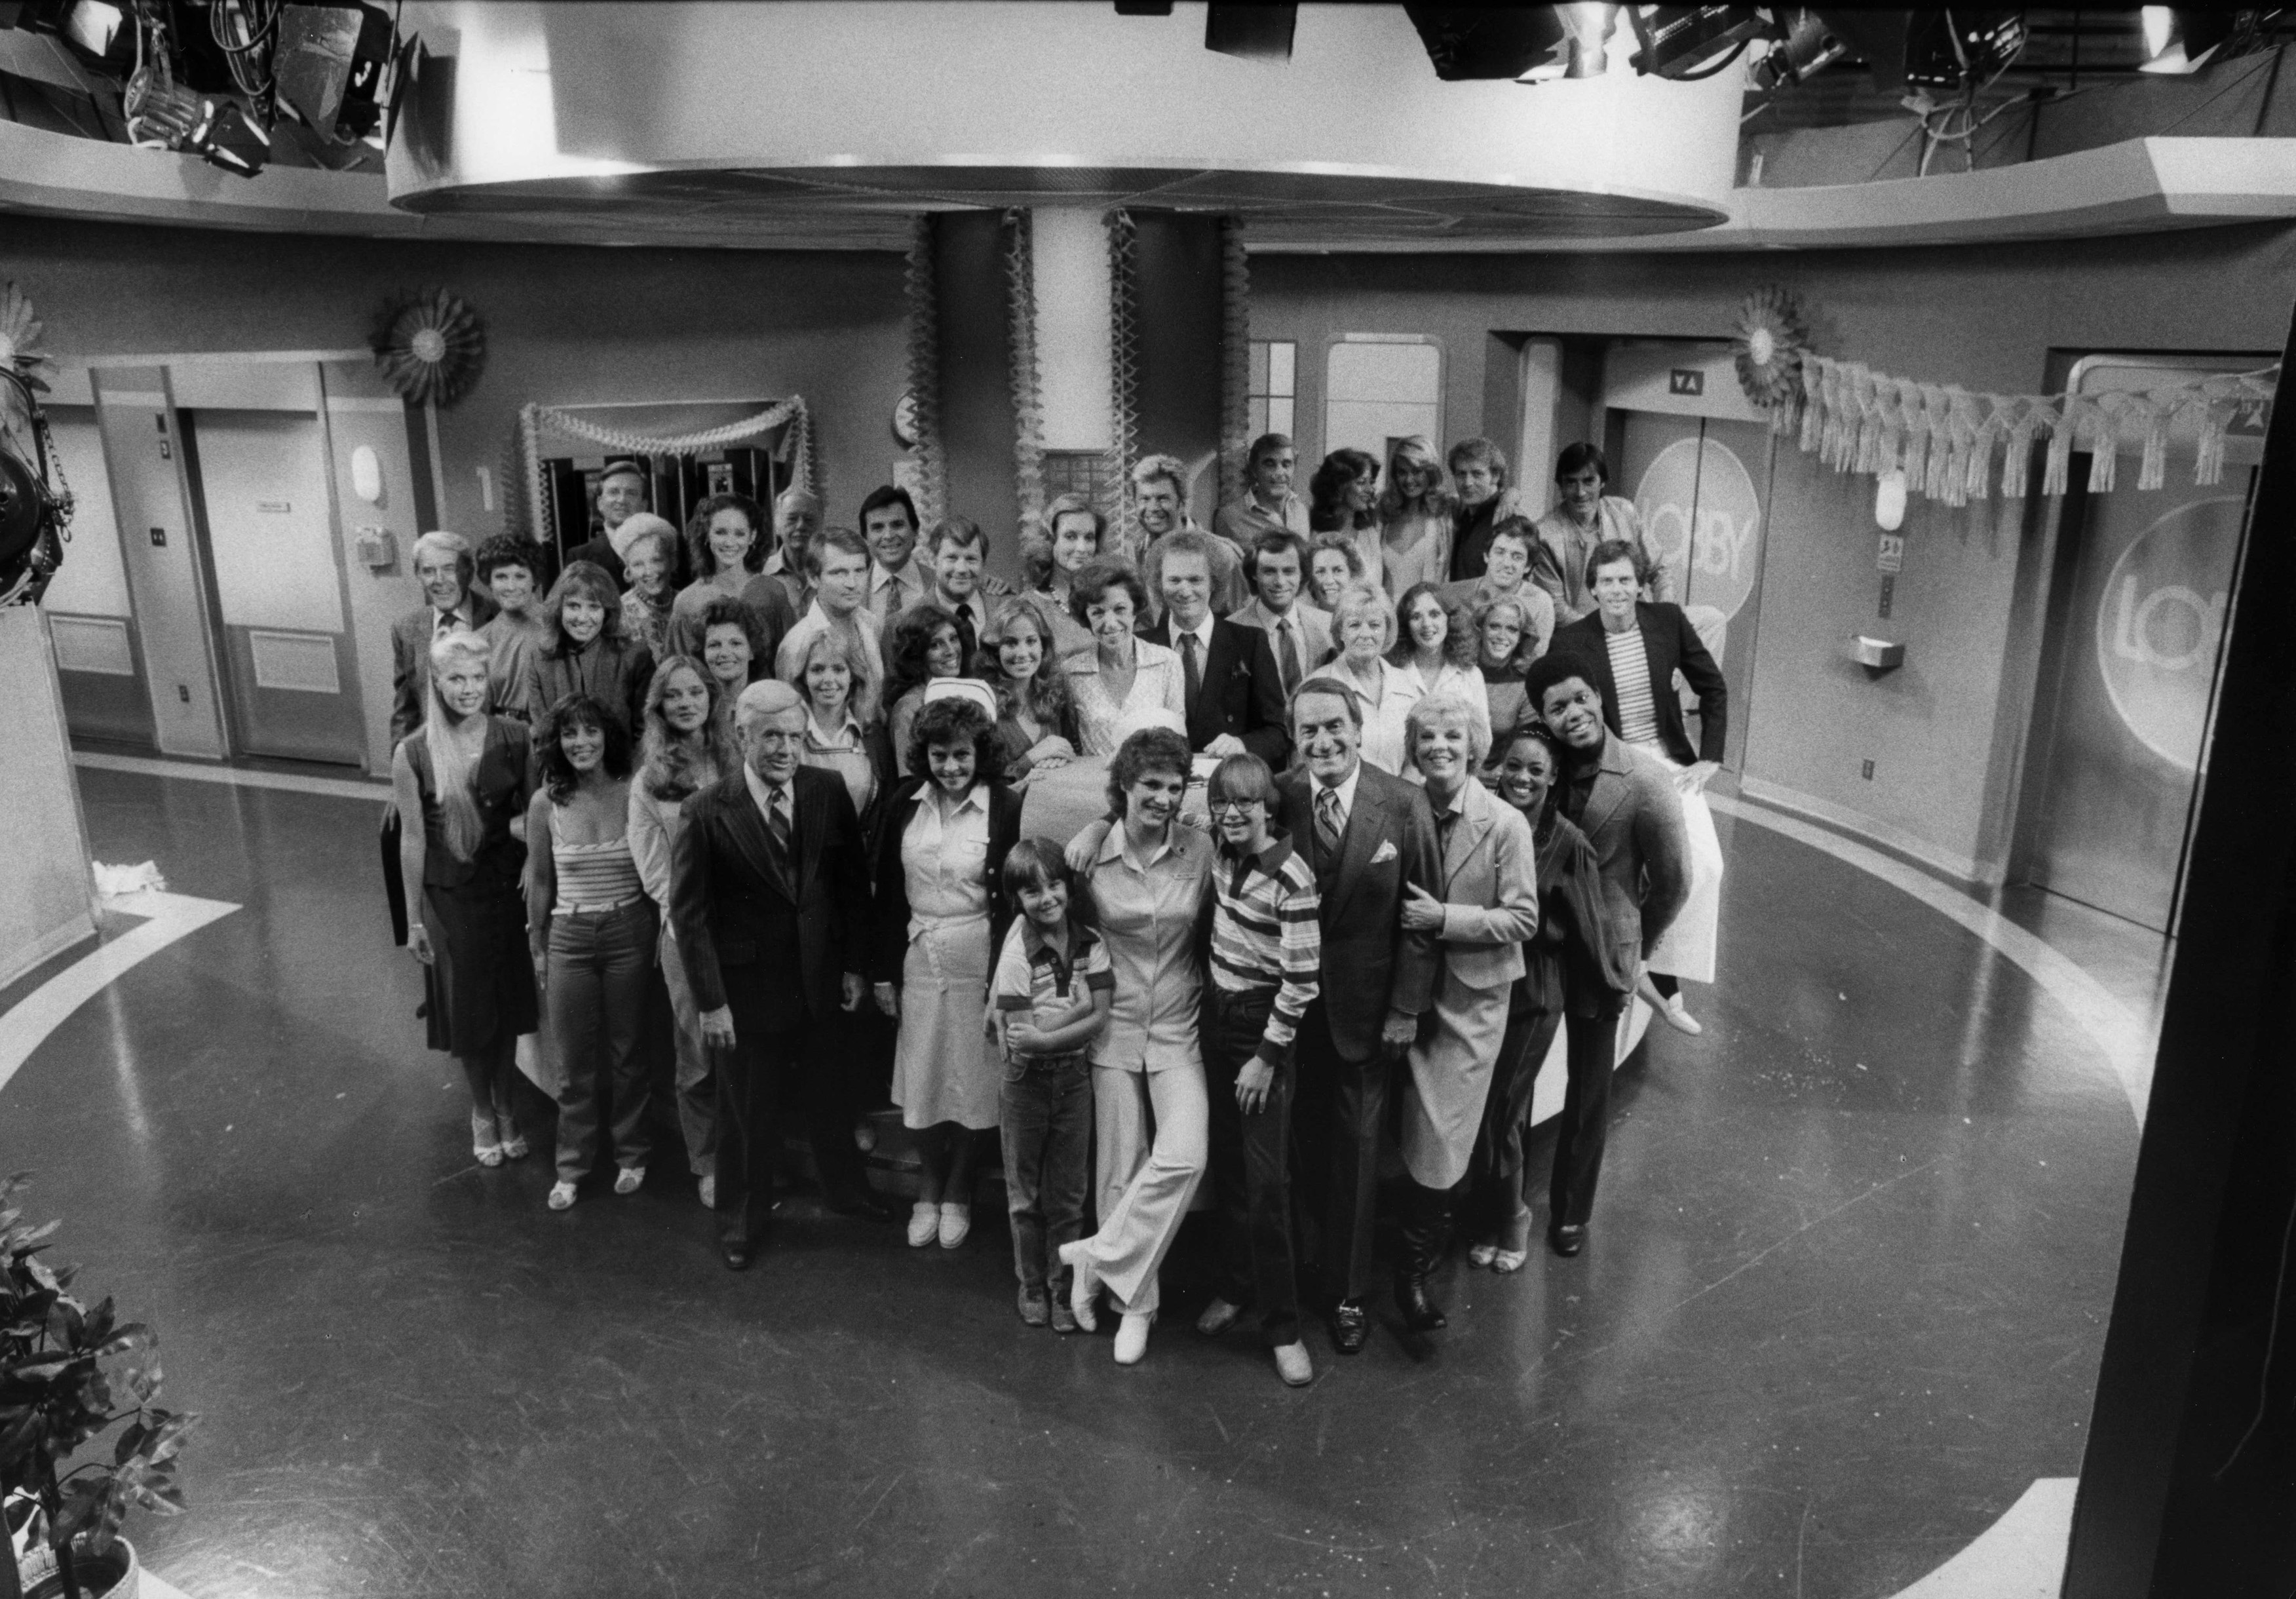 The "General Hospital" cast in 1981 | Source: Getty Images